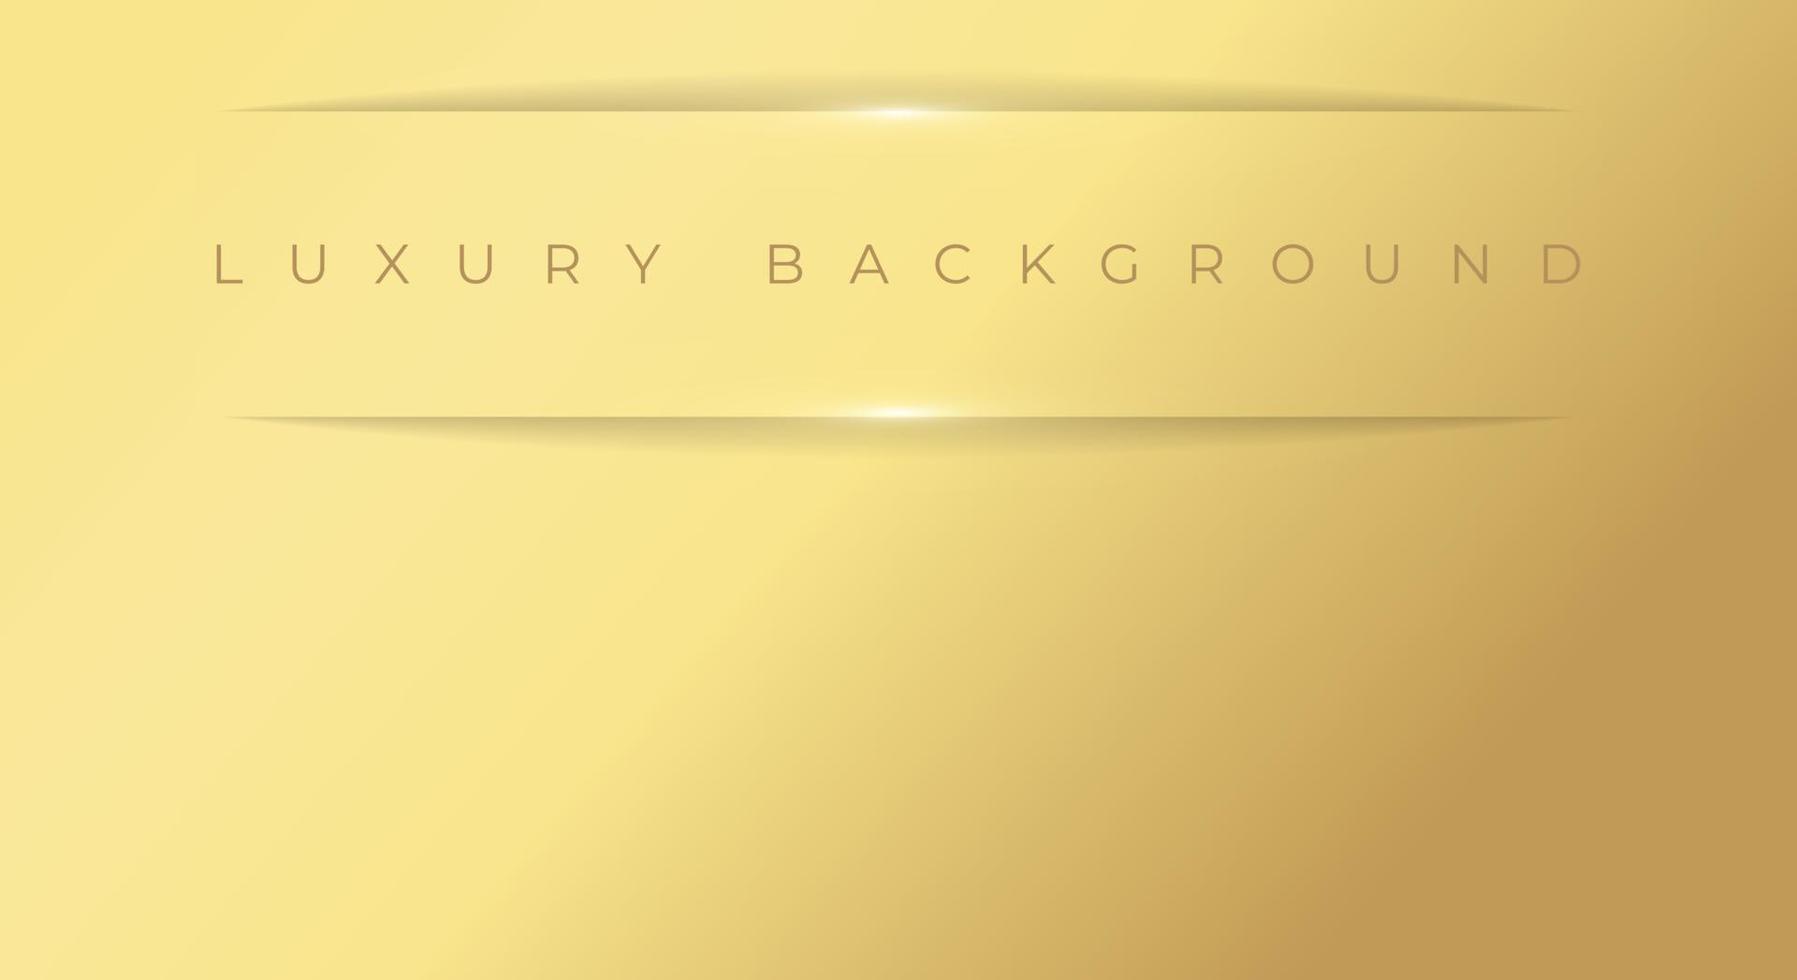 Golden Luxury Backgrounds Light Effected Geometric Cut Stripes Line with Copy Space for Text or Message vector